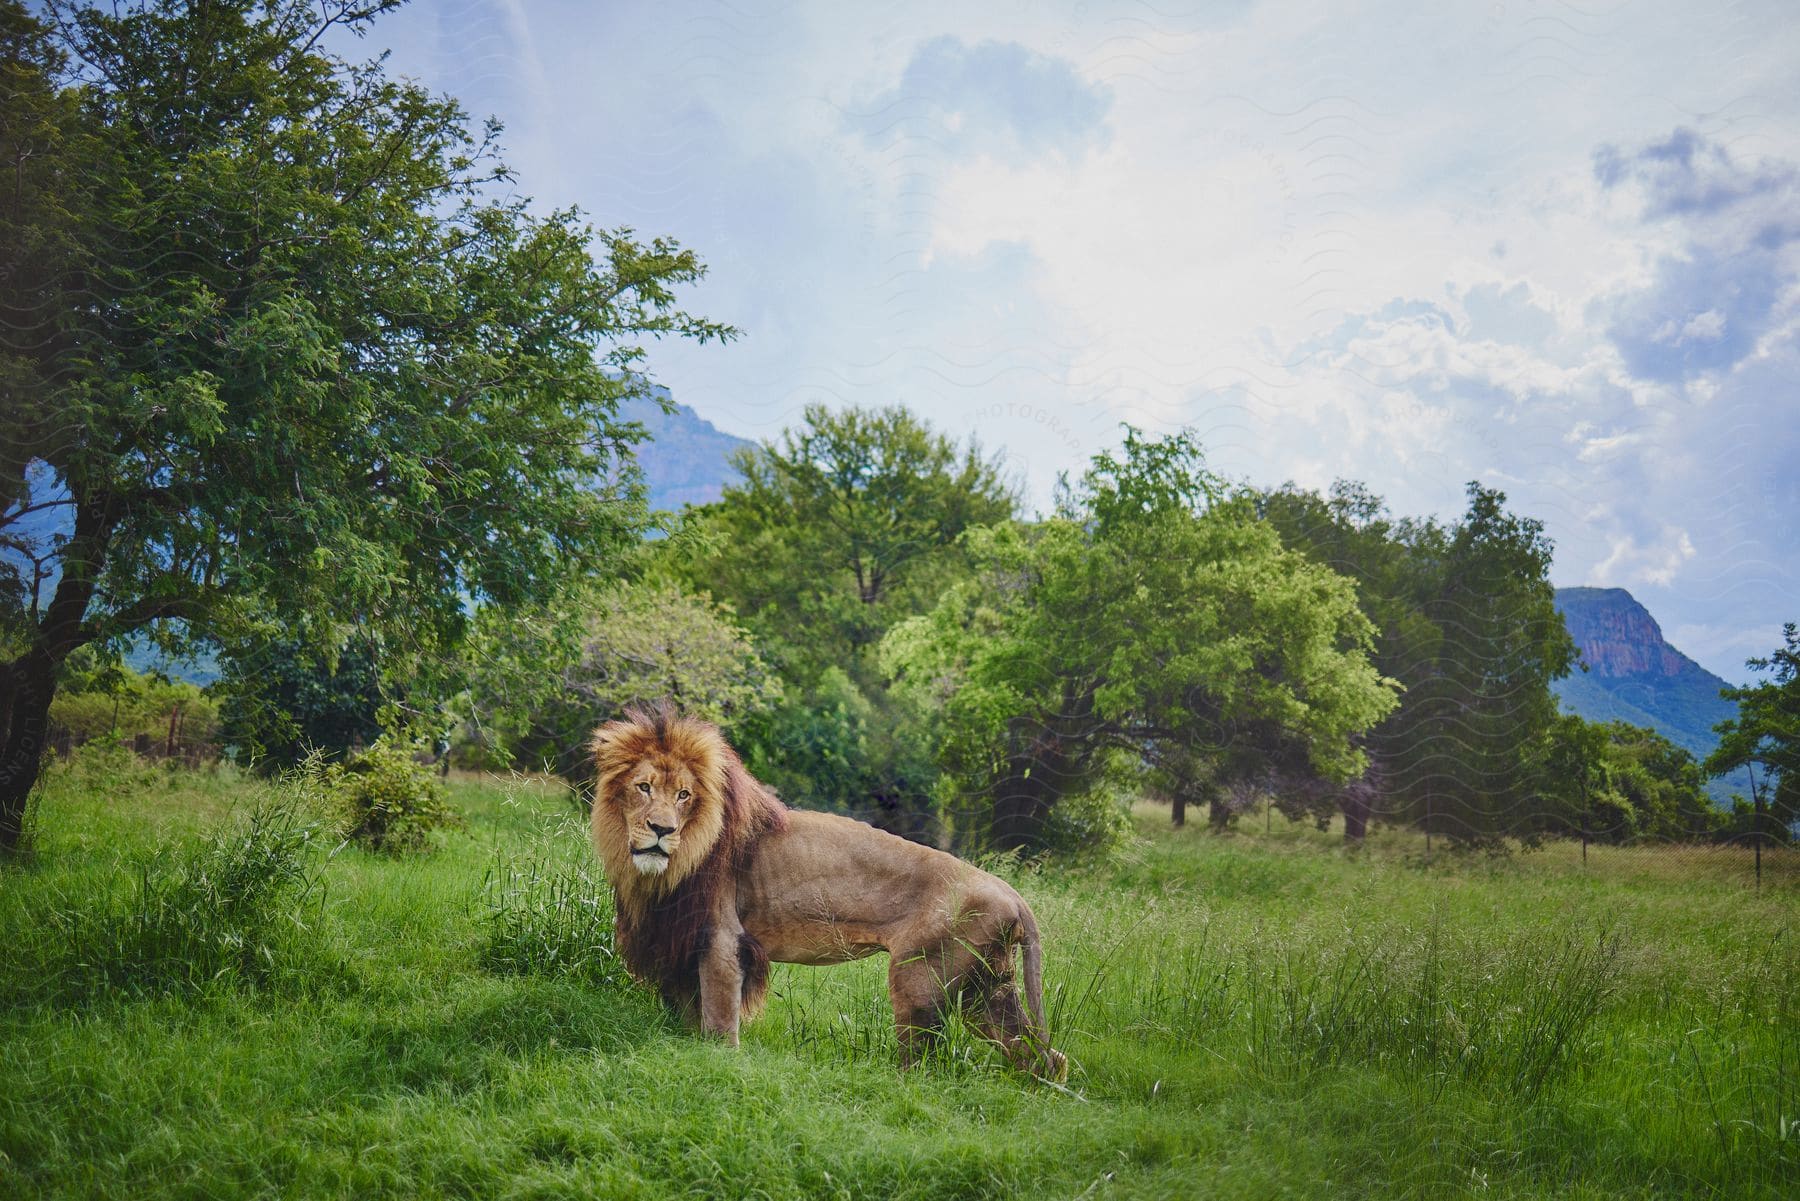 Adult male lion stands in field near trees with mountains in the background on a cloudy day.